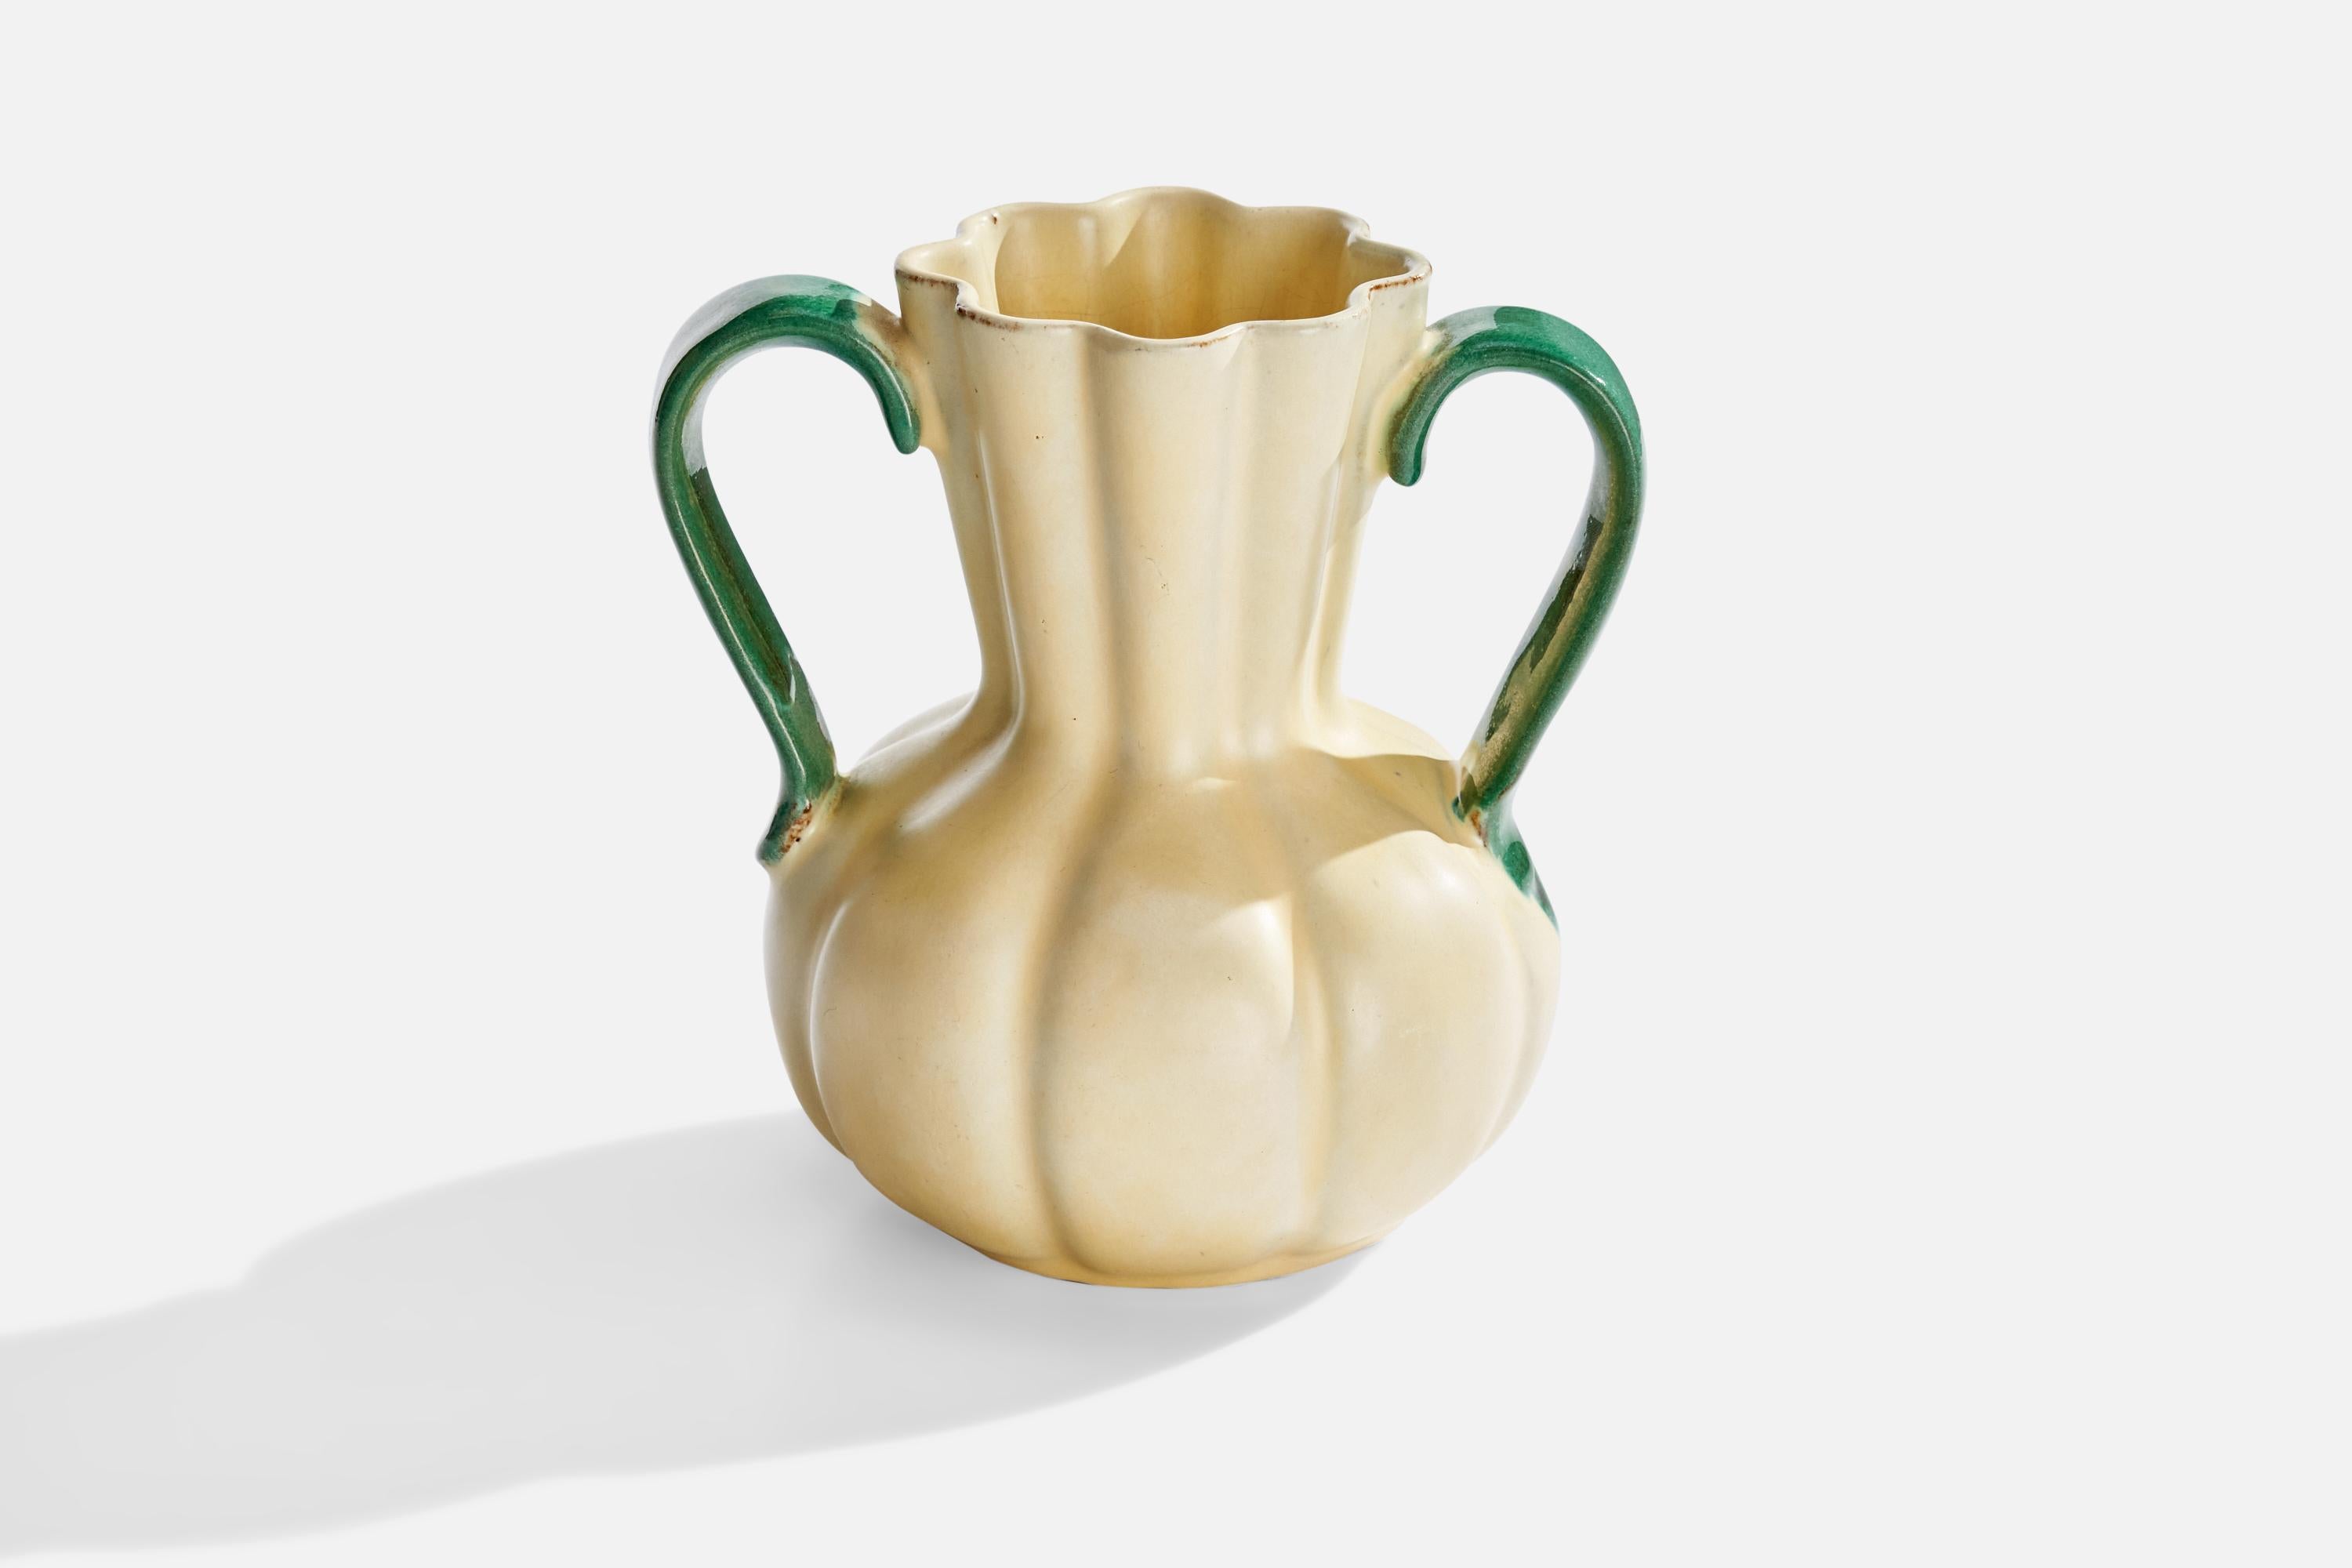 A an off-white and green-glazed earthenware vase designed and produced by Upsala Ekeby, Sweden, 1930s.